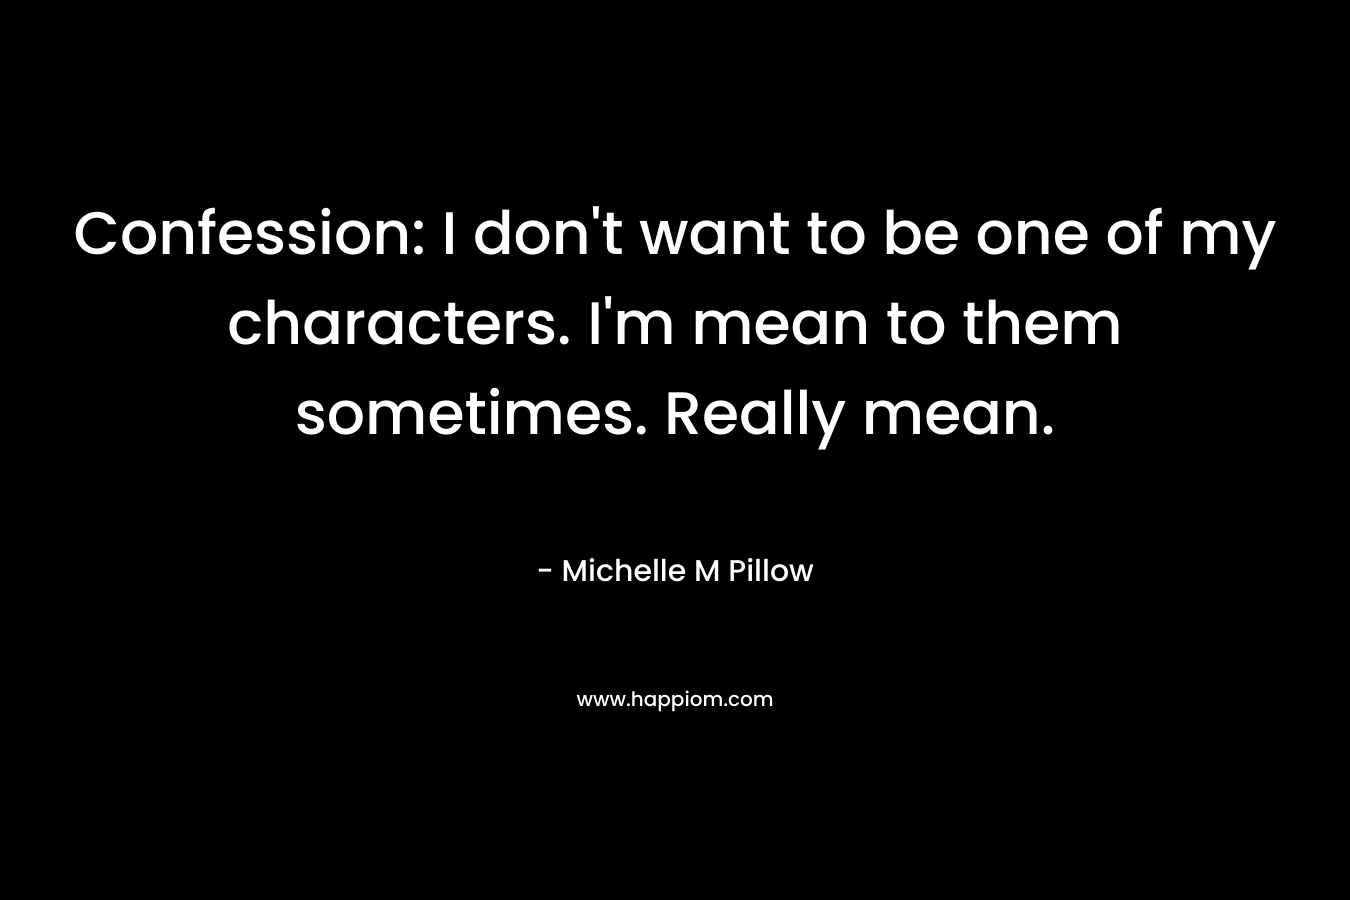 Confession: I don't want to be one of my characters. I'm mean to them sometimes. Really mean.